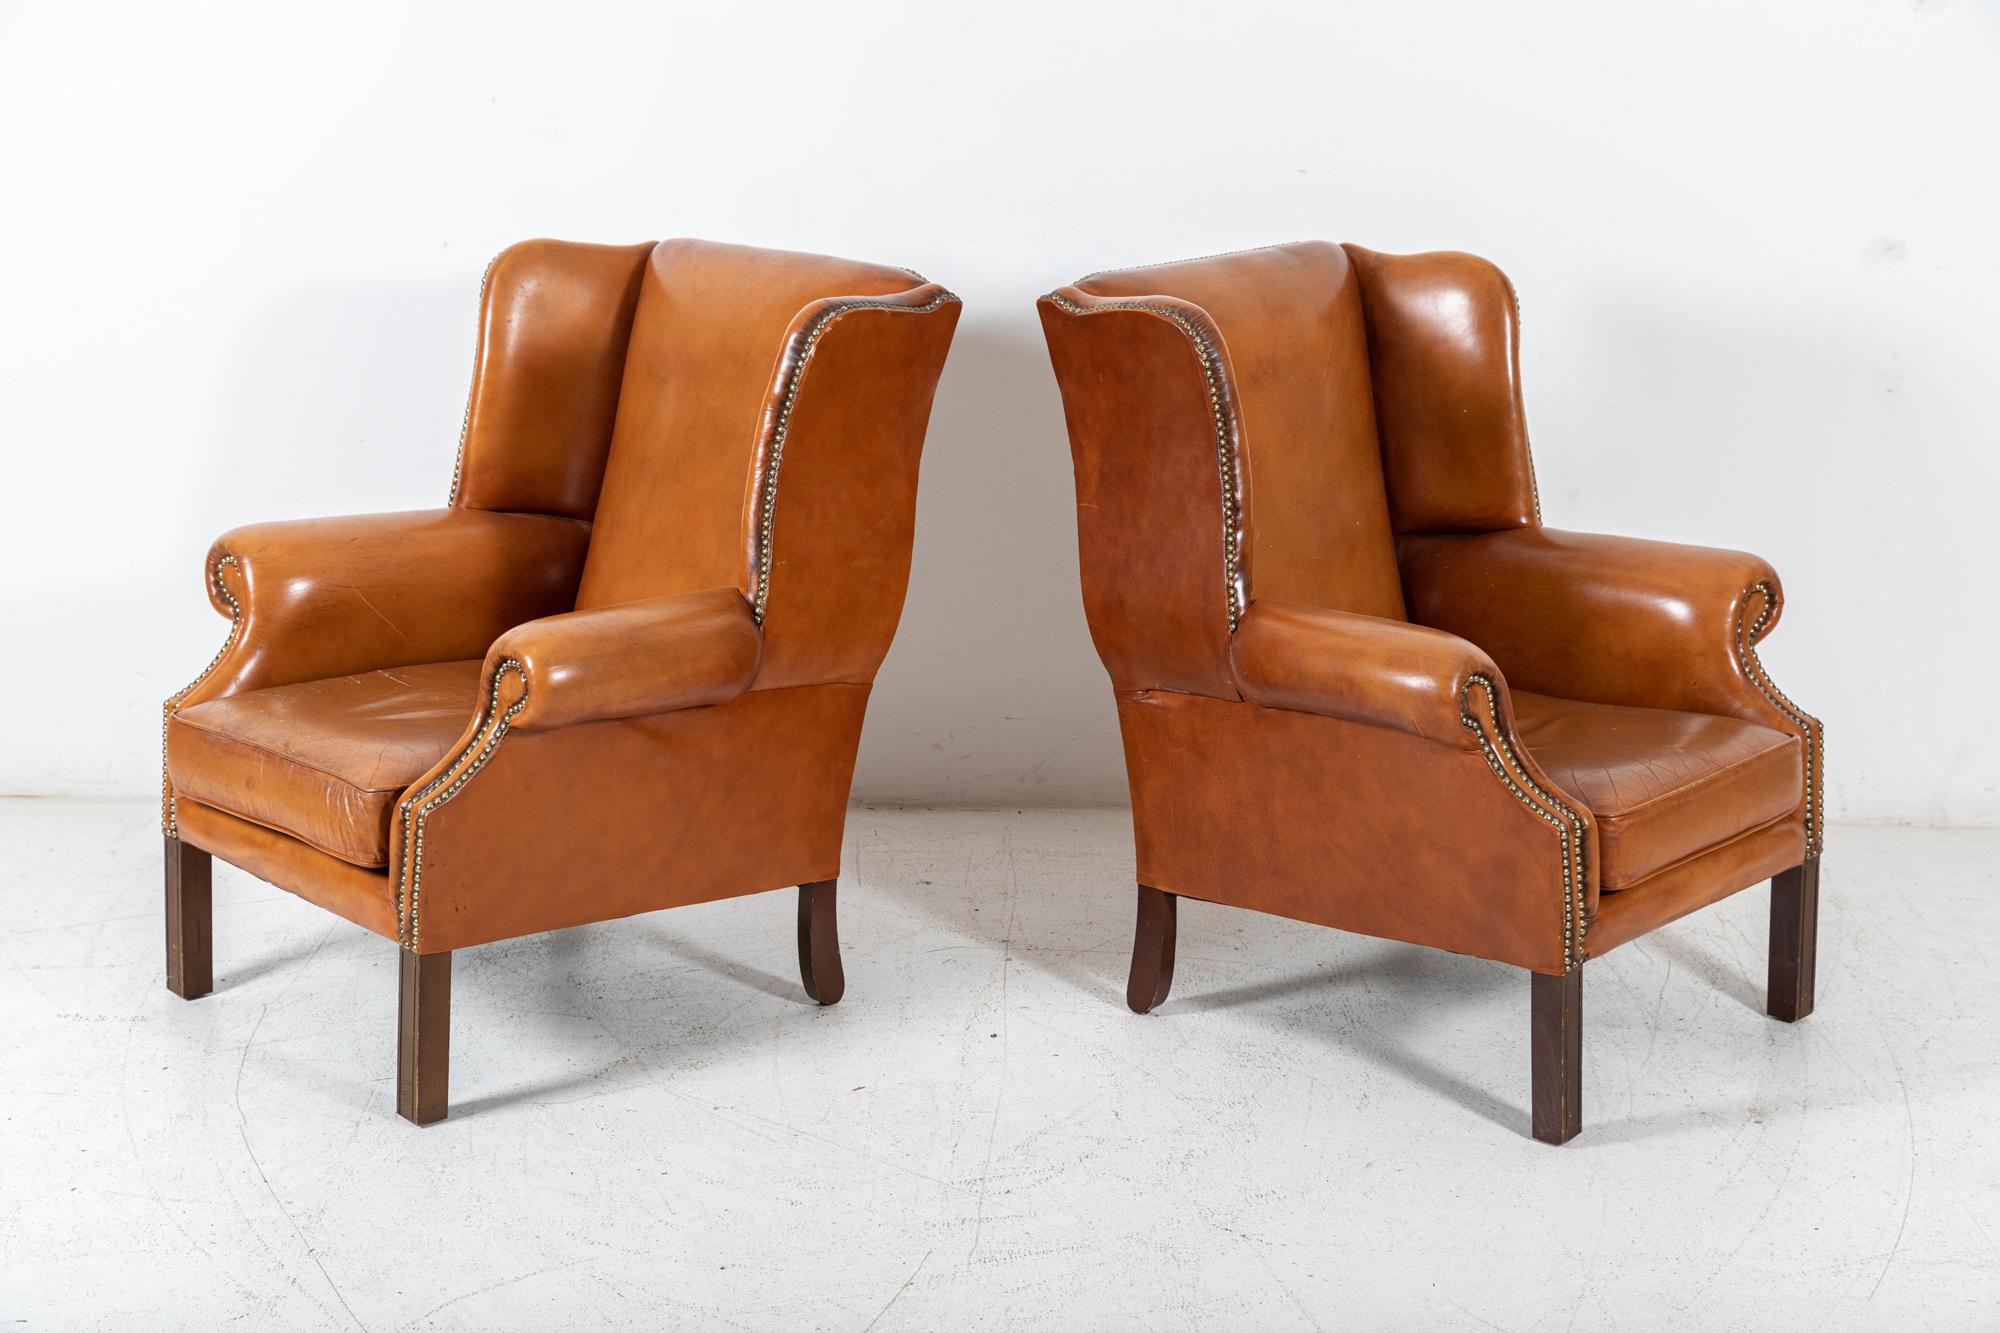 Circa 1950

Pair Georgian style tan leather wingback armchairs

Brass studded with excellent colour and form

Price is for the pair



Measures: W76 x D64 x H97 cm.